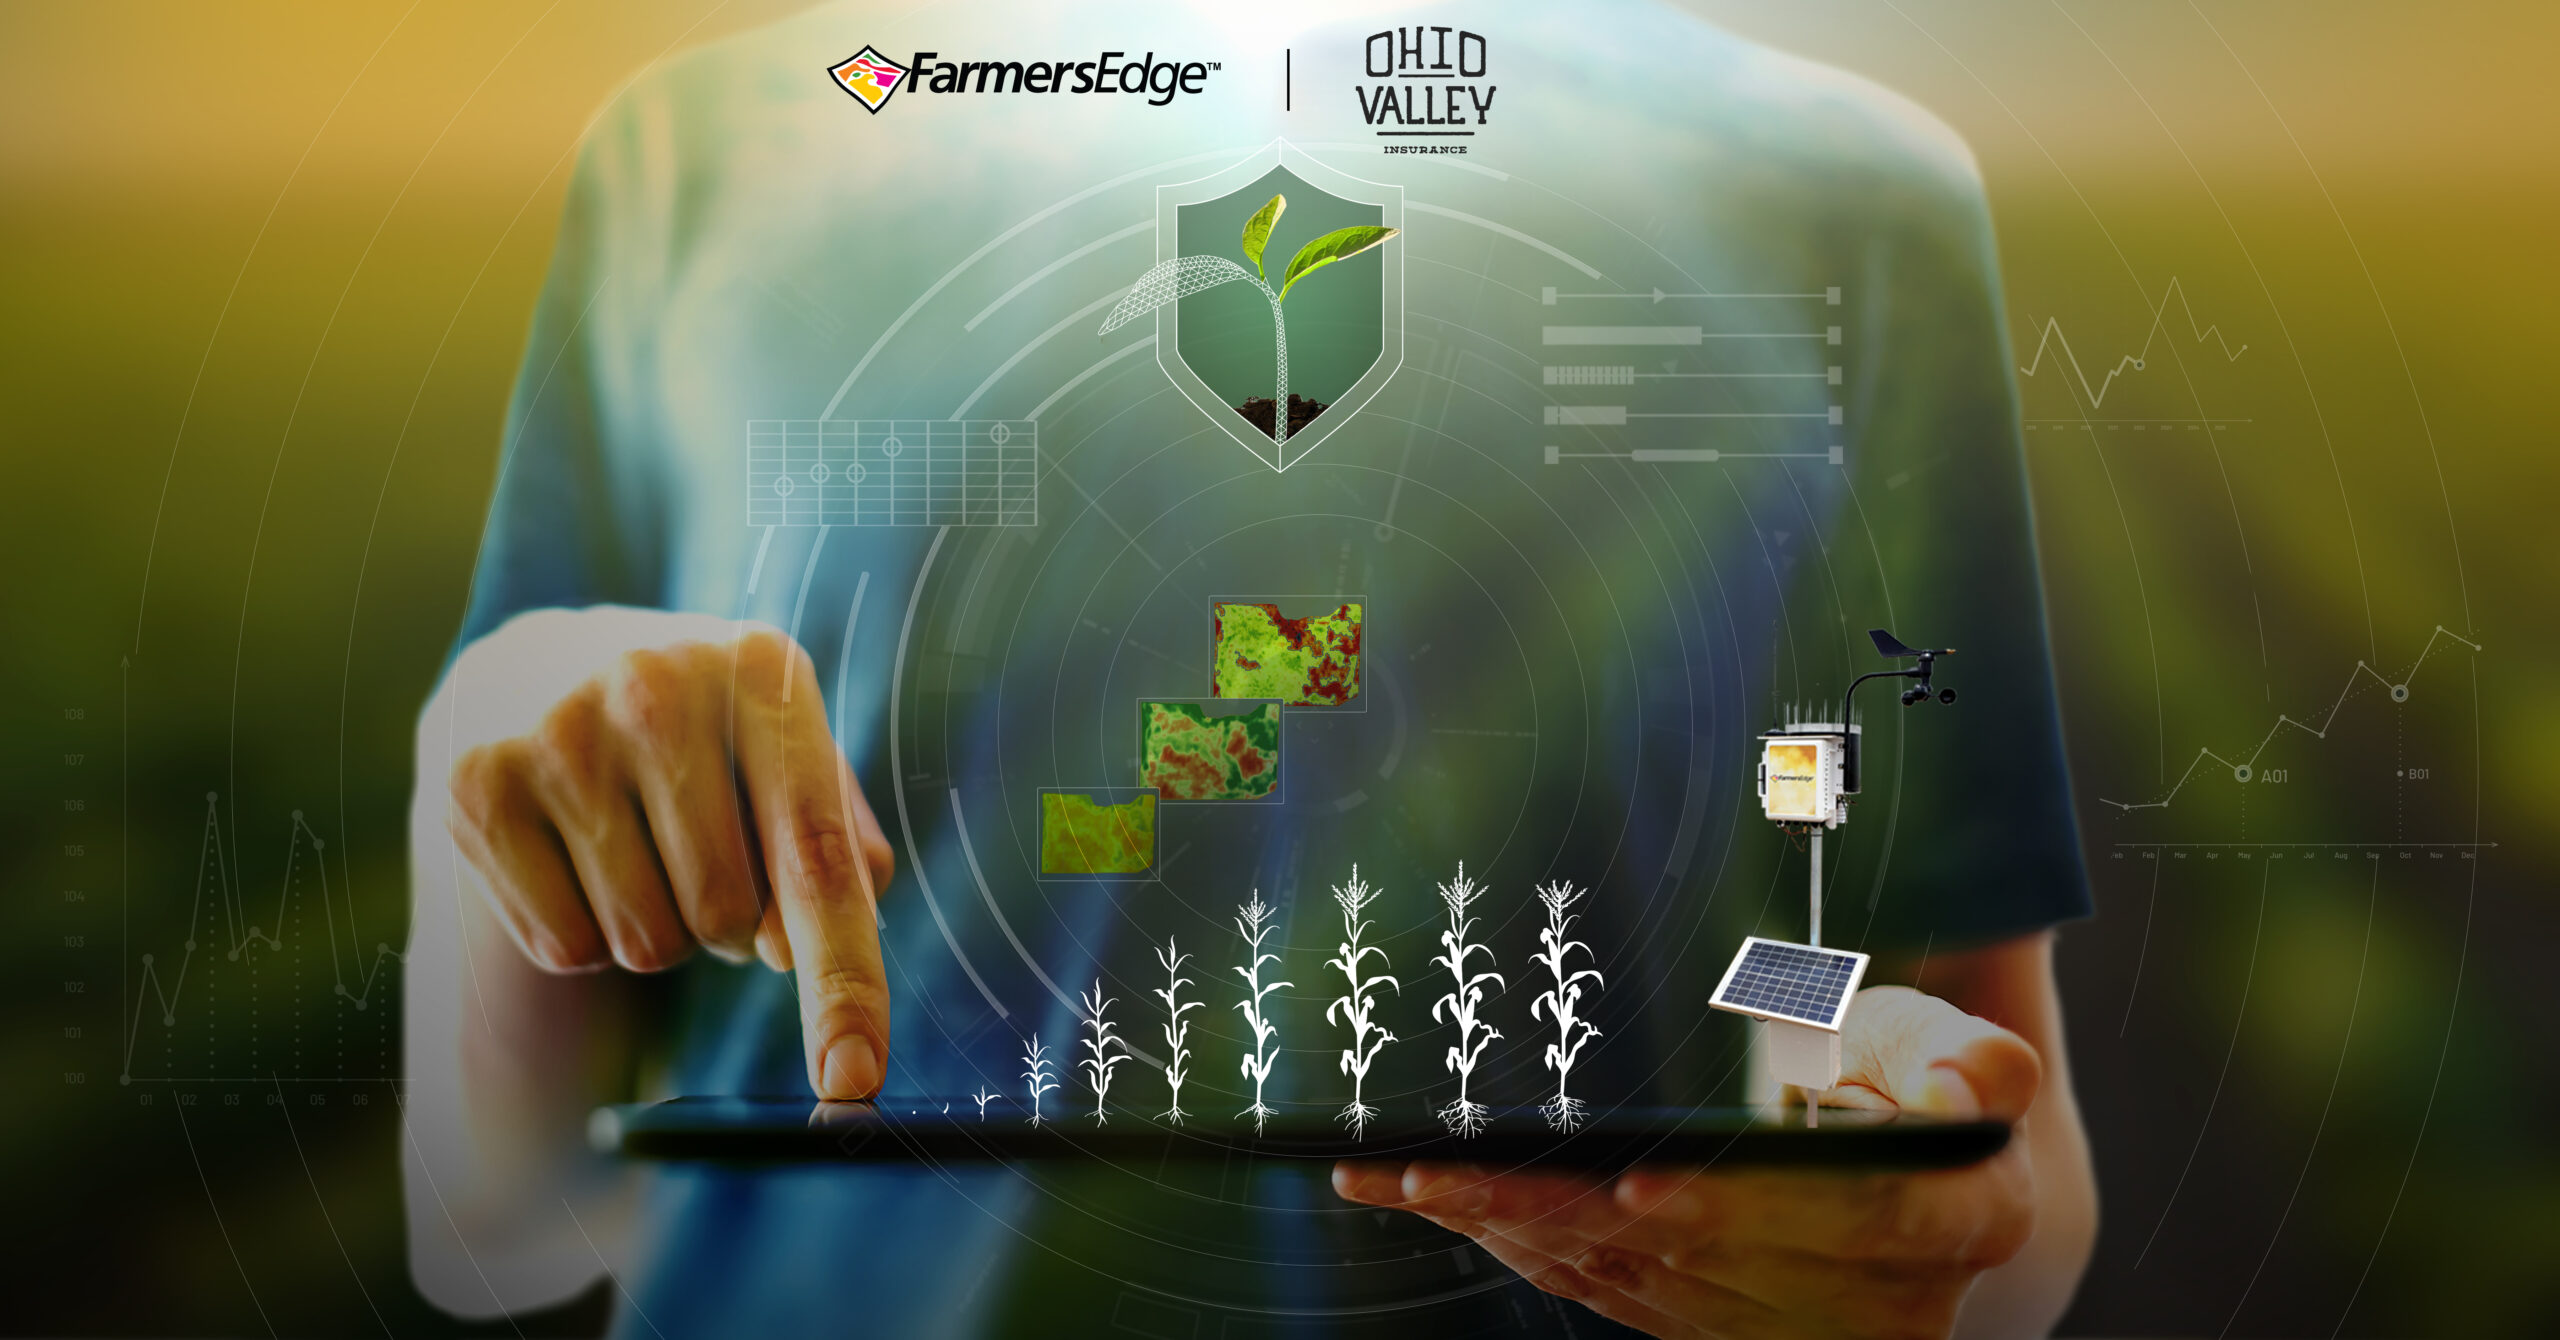 Ohio Valley Insurance and Farmers Edge Form Strategic Alliance to Digitize Crop Insurance Services and Offer Customized, Data-Driven Coverage to Growers